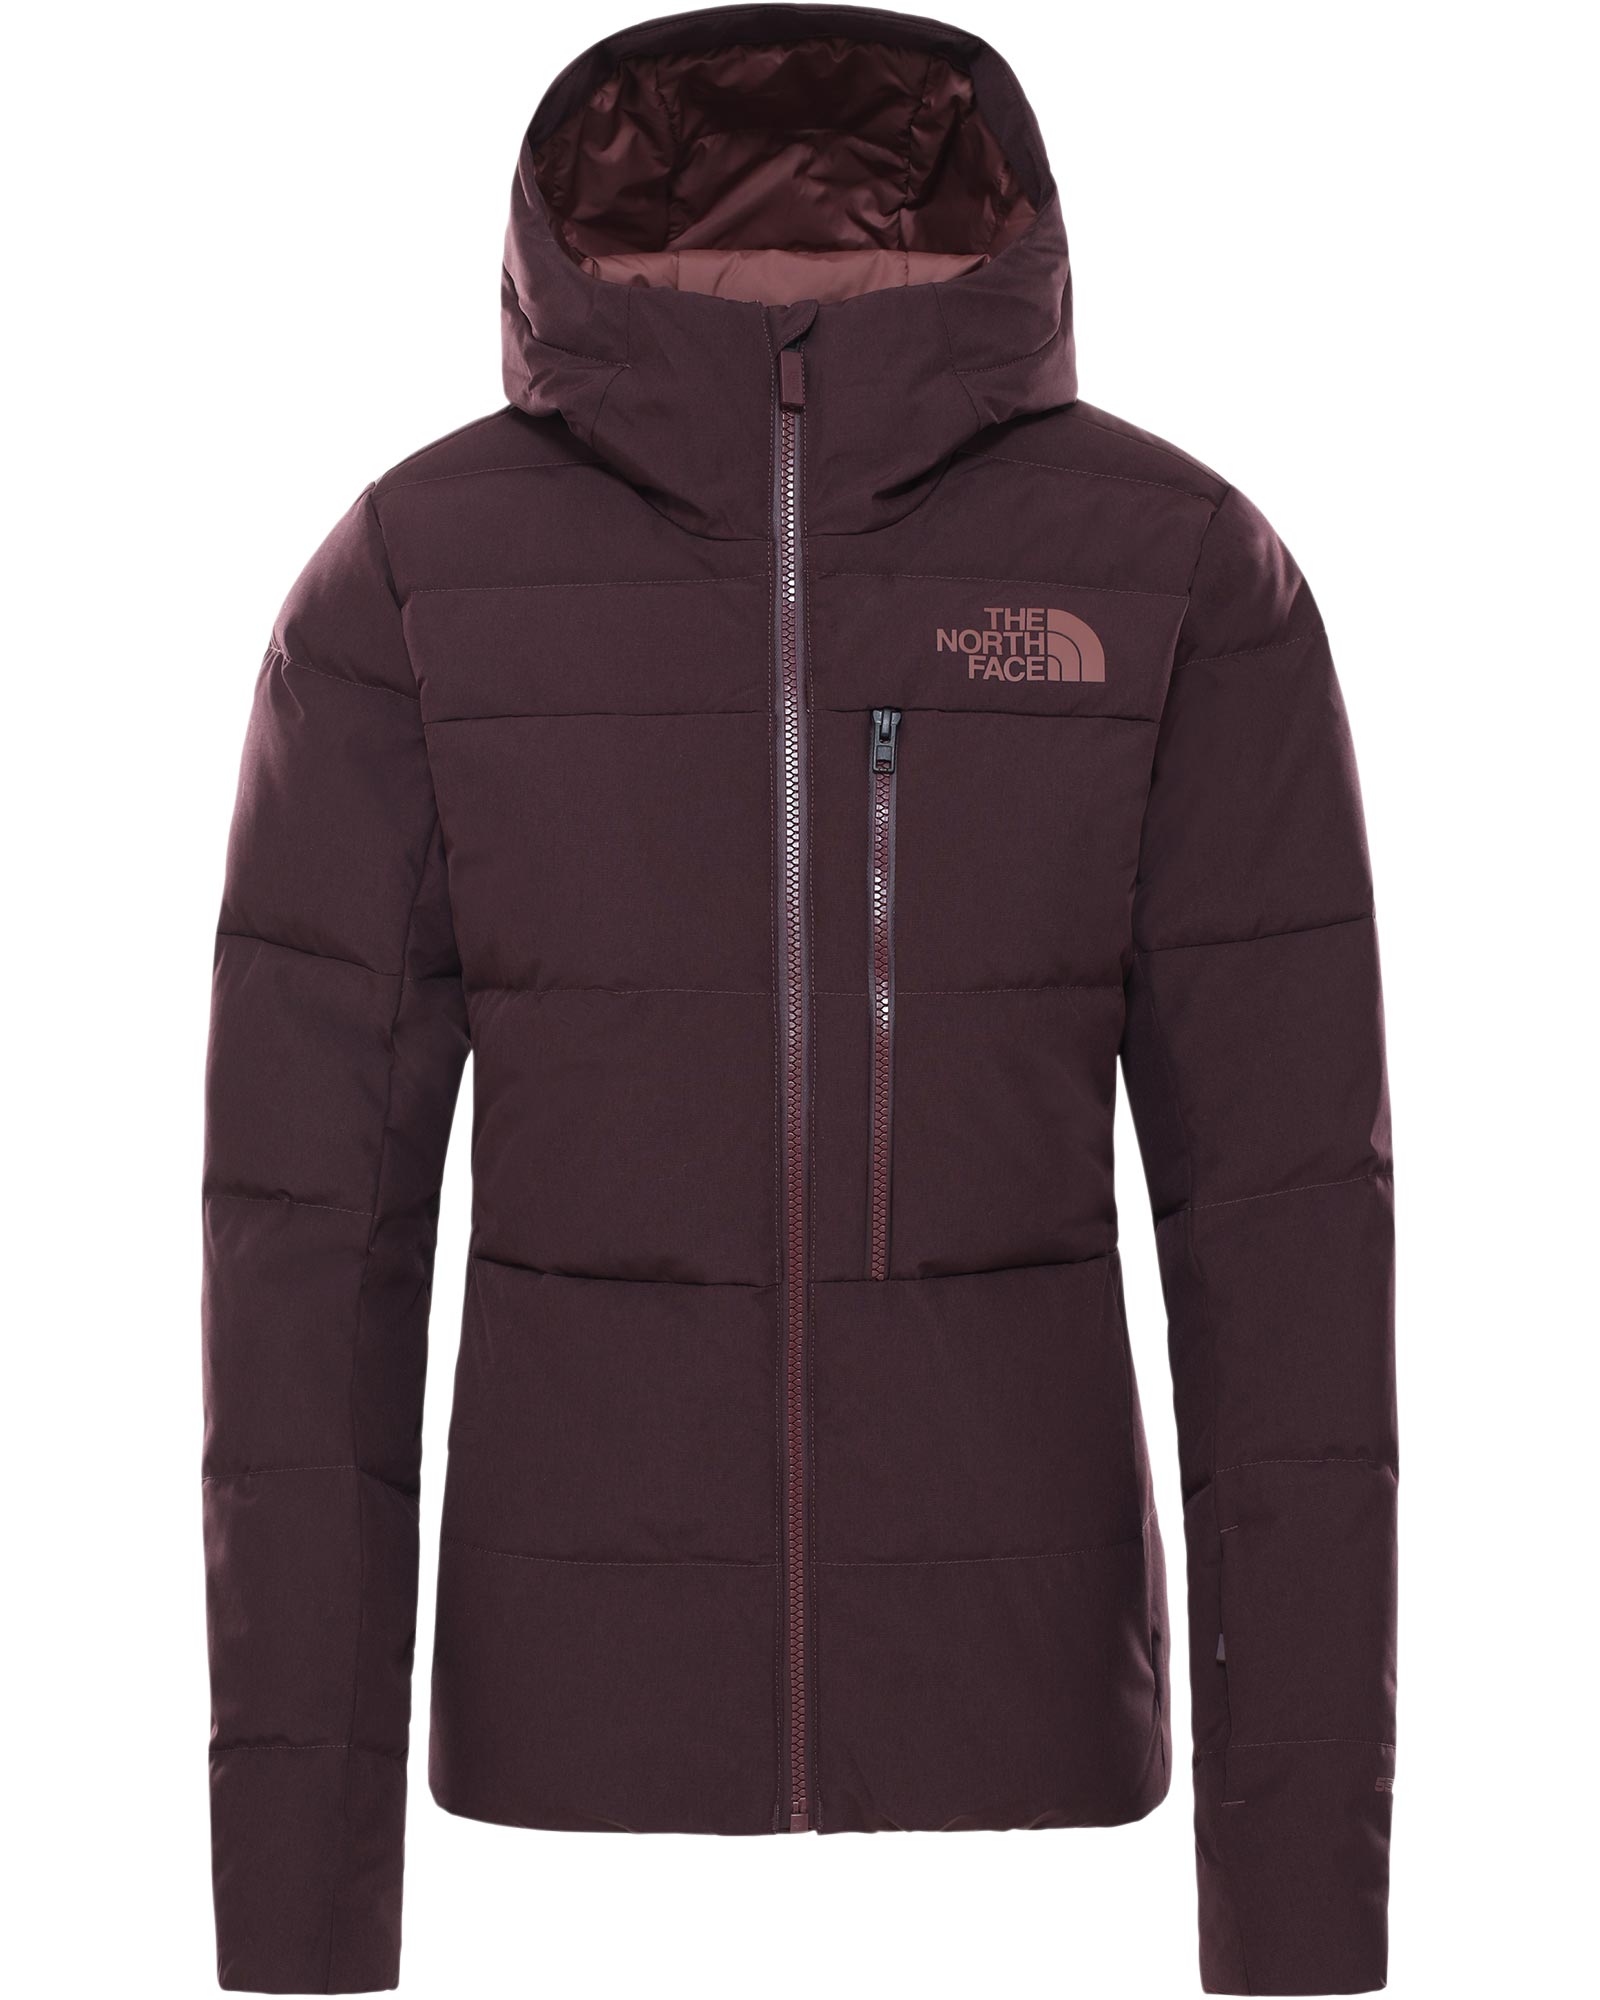 The North Face Heavenly Down Women’s Jacket - Root Brown Heather S